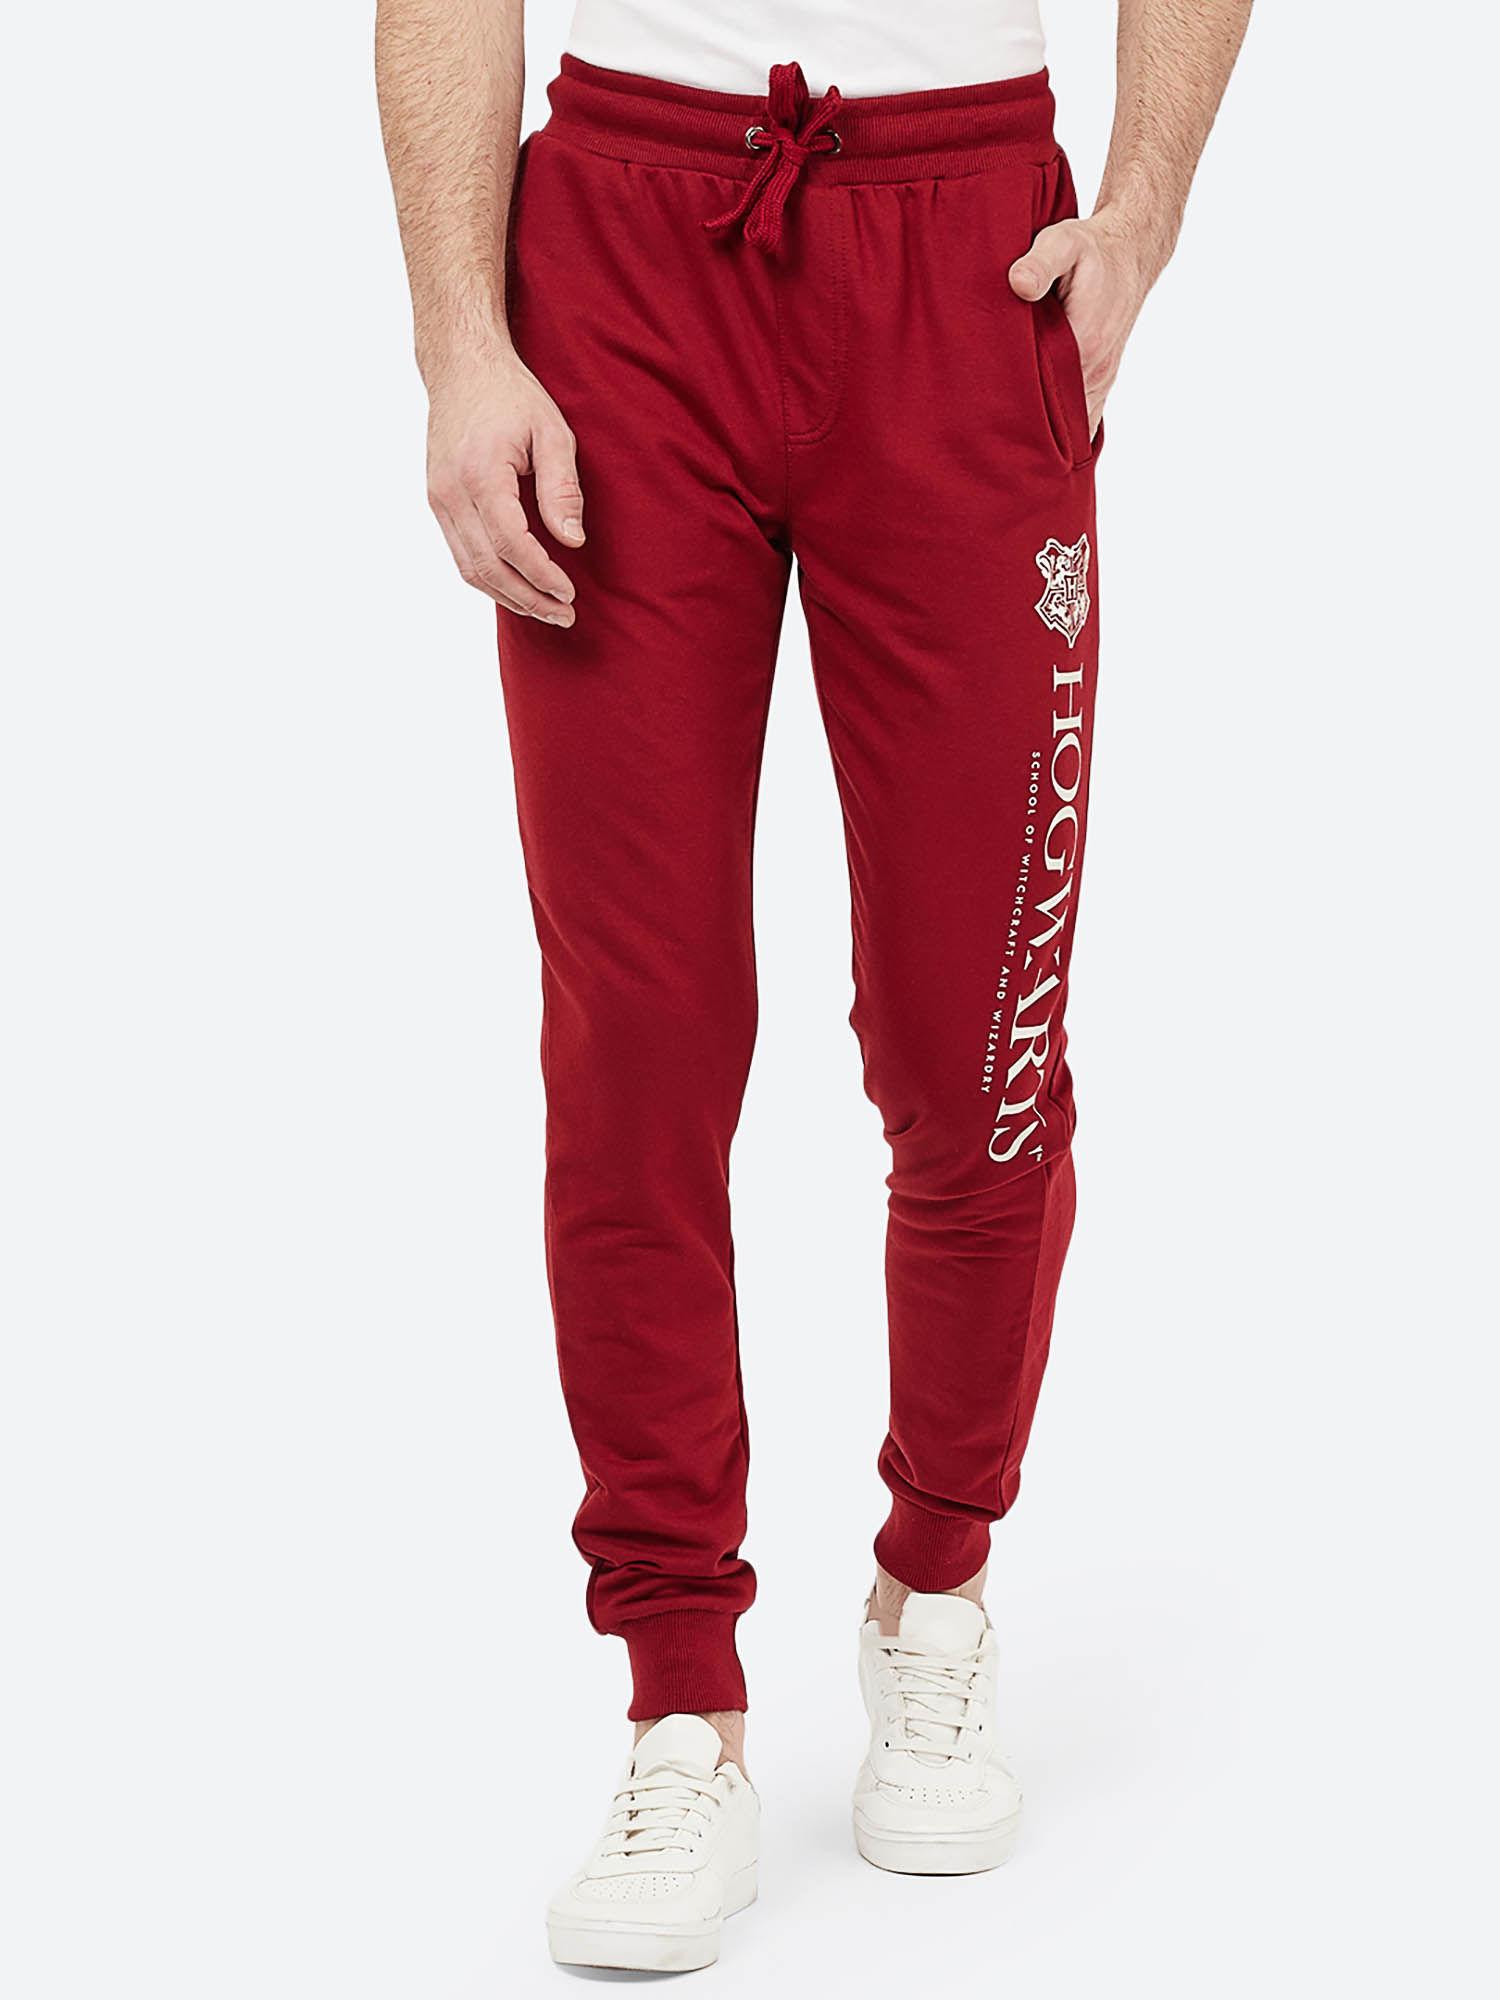 harry potter featured maroon joggers for men